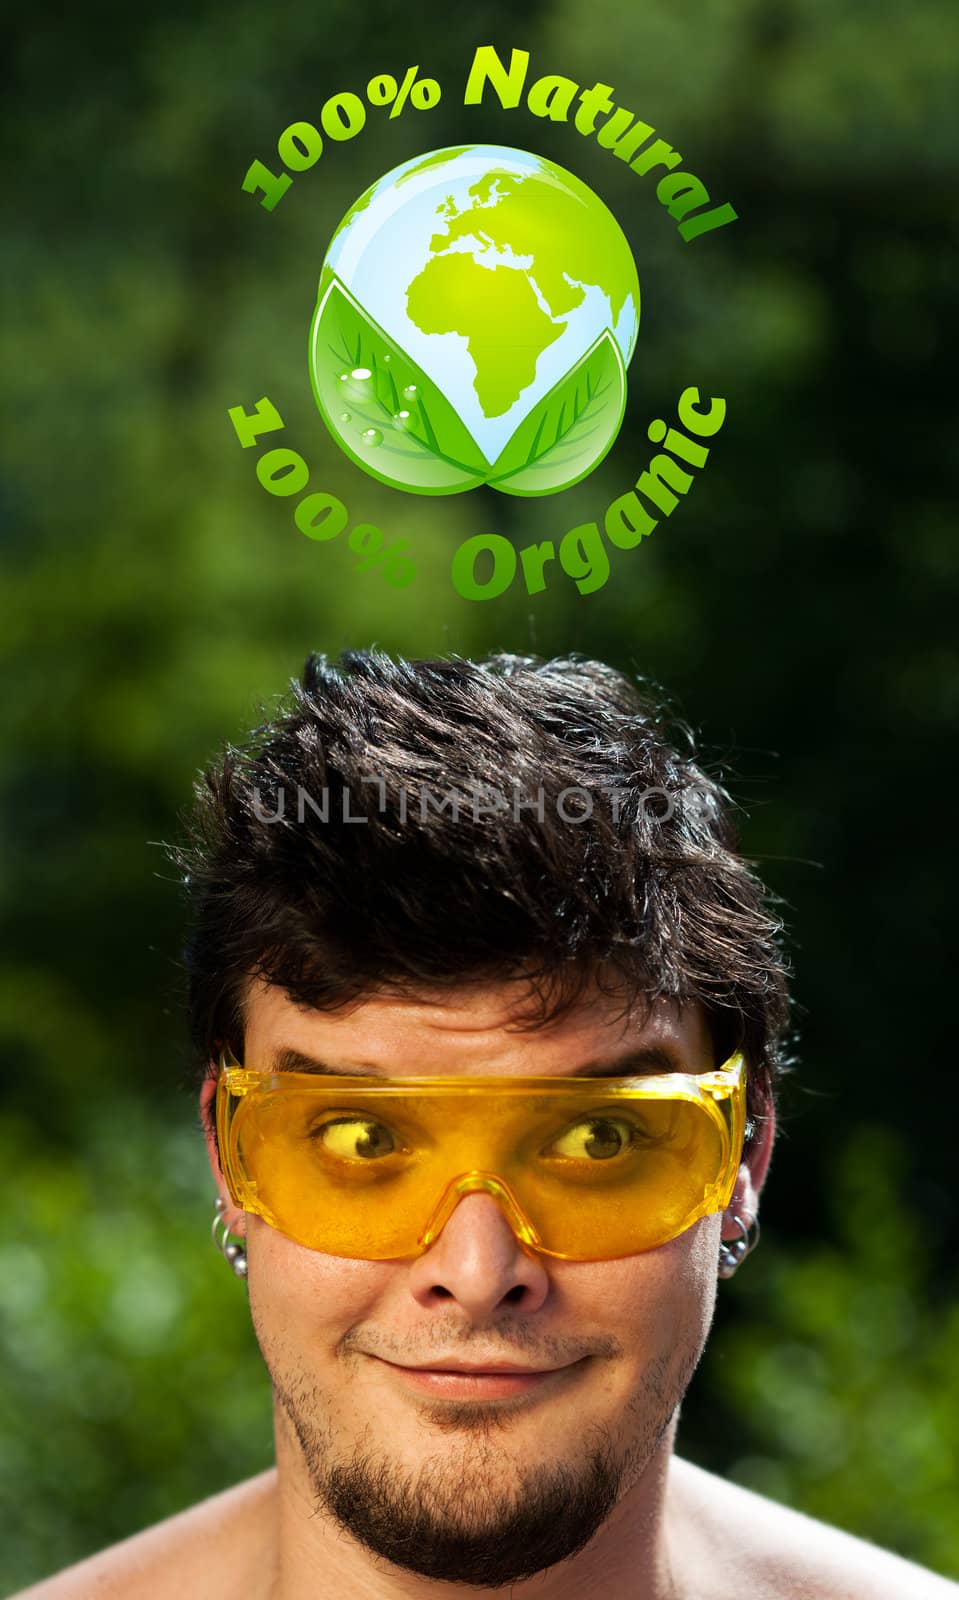 Young head looking at green eco sign by ra2studio